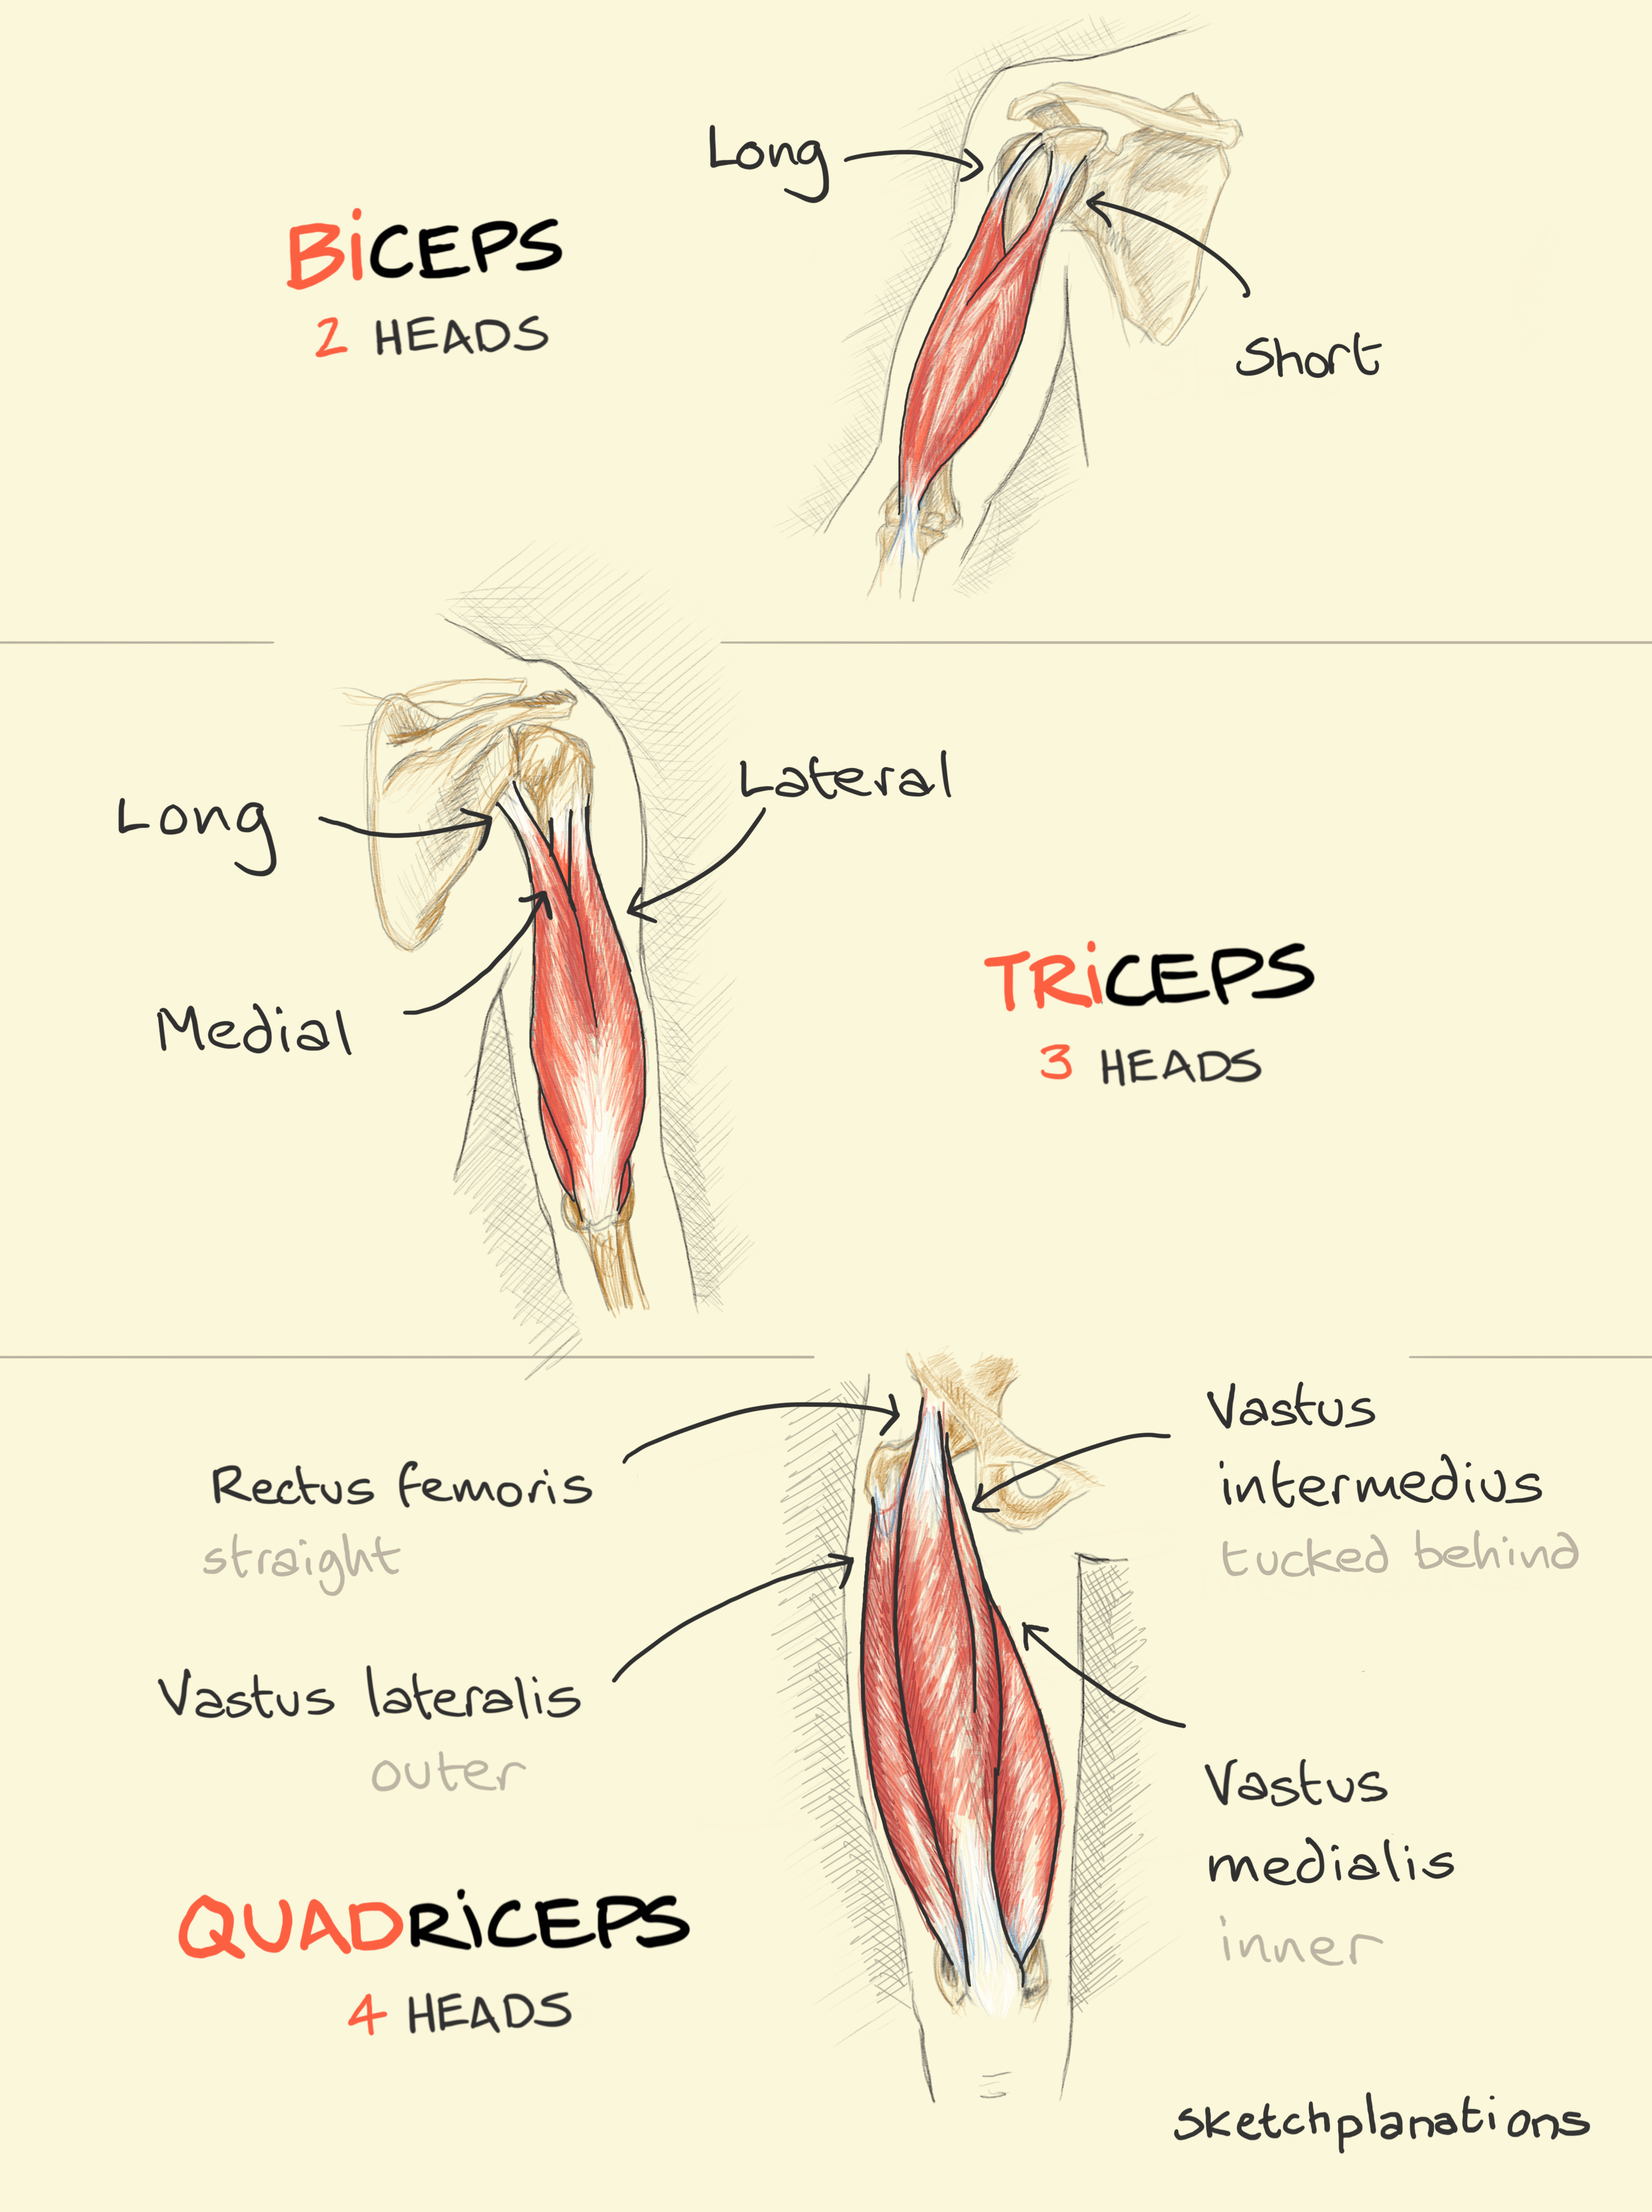 Biceps, triceps and quadriceps: muscles drawing showing the 2, 3, and 4 connecting origins of each, respectively